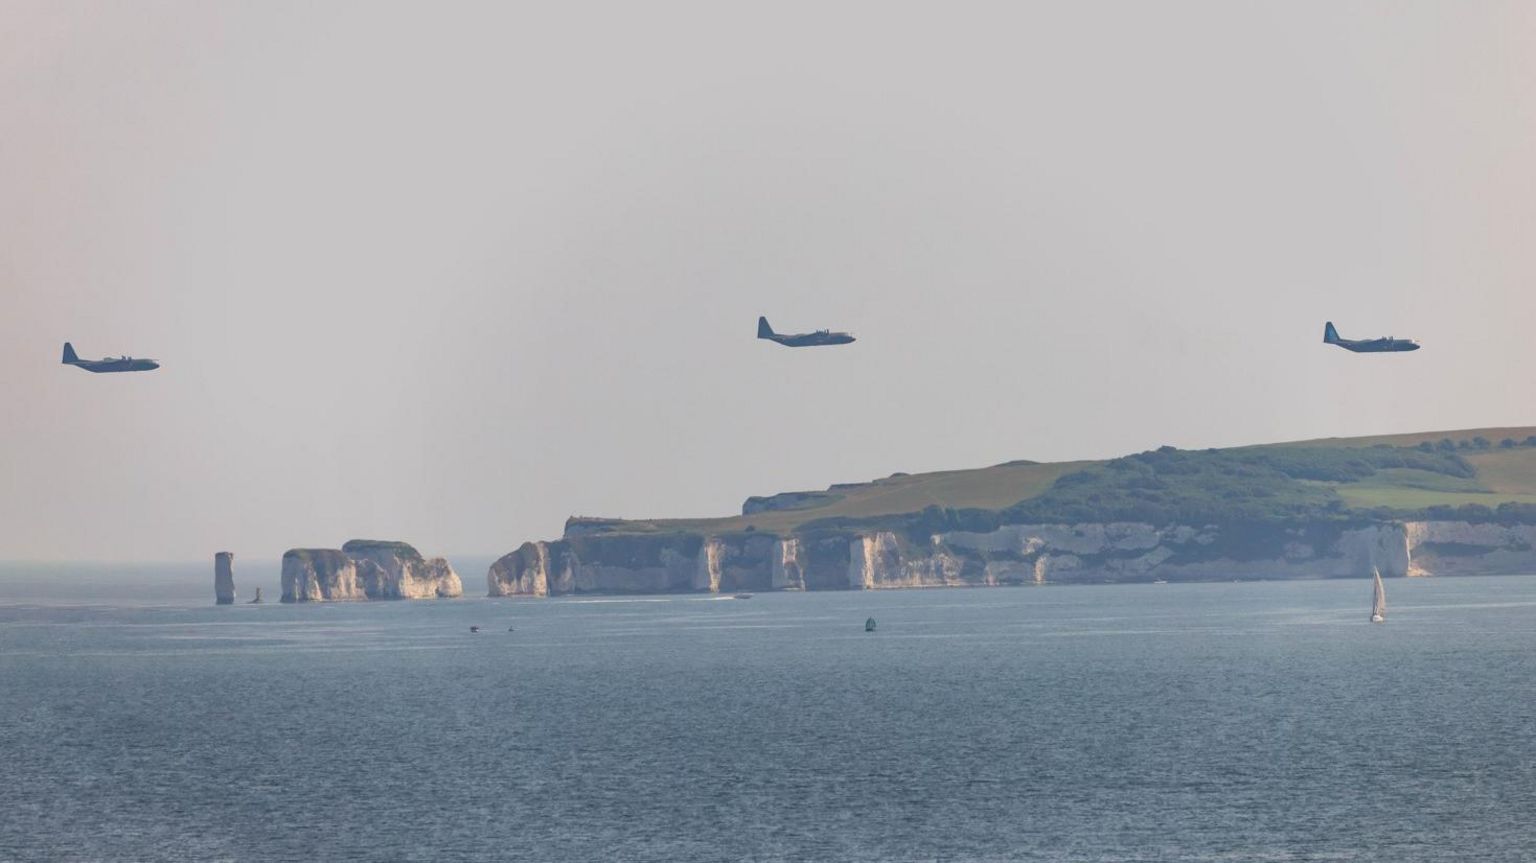 Three Hercules aircraft flying over Old Harry Rocks